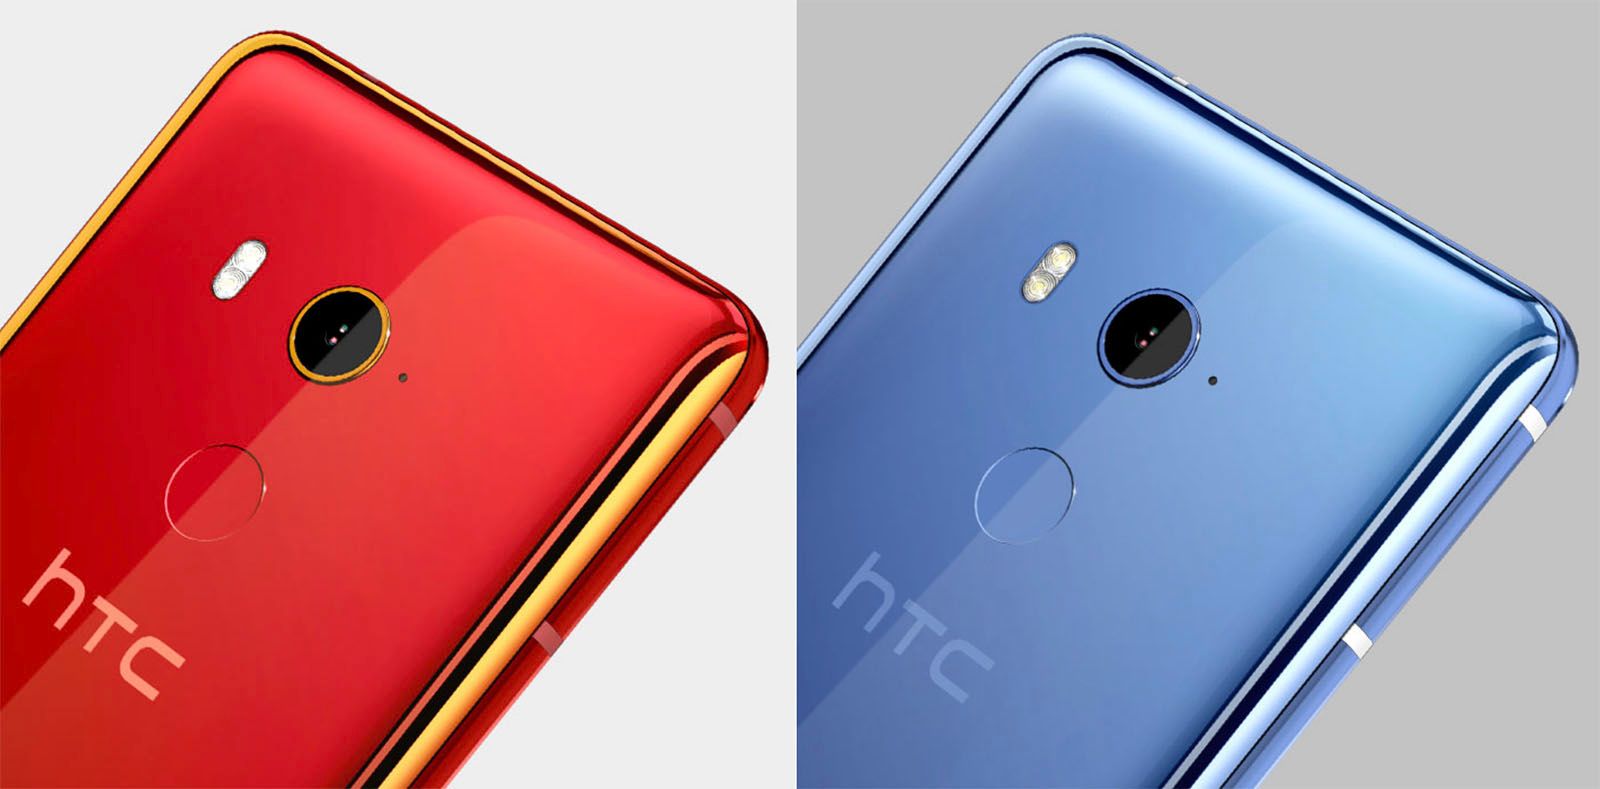 HTC U11 EYEs revealed selfie shooter phone now official image 2